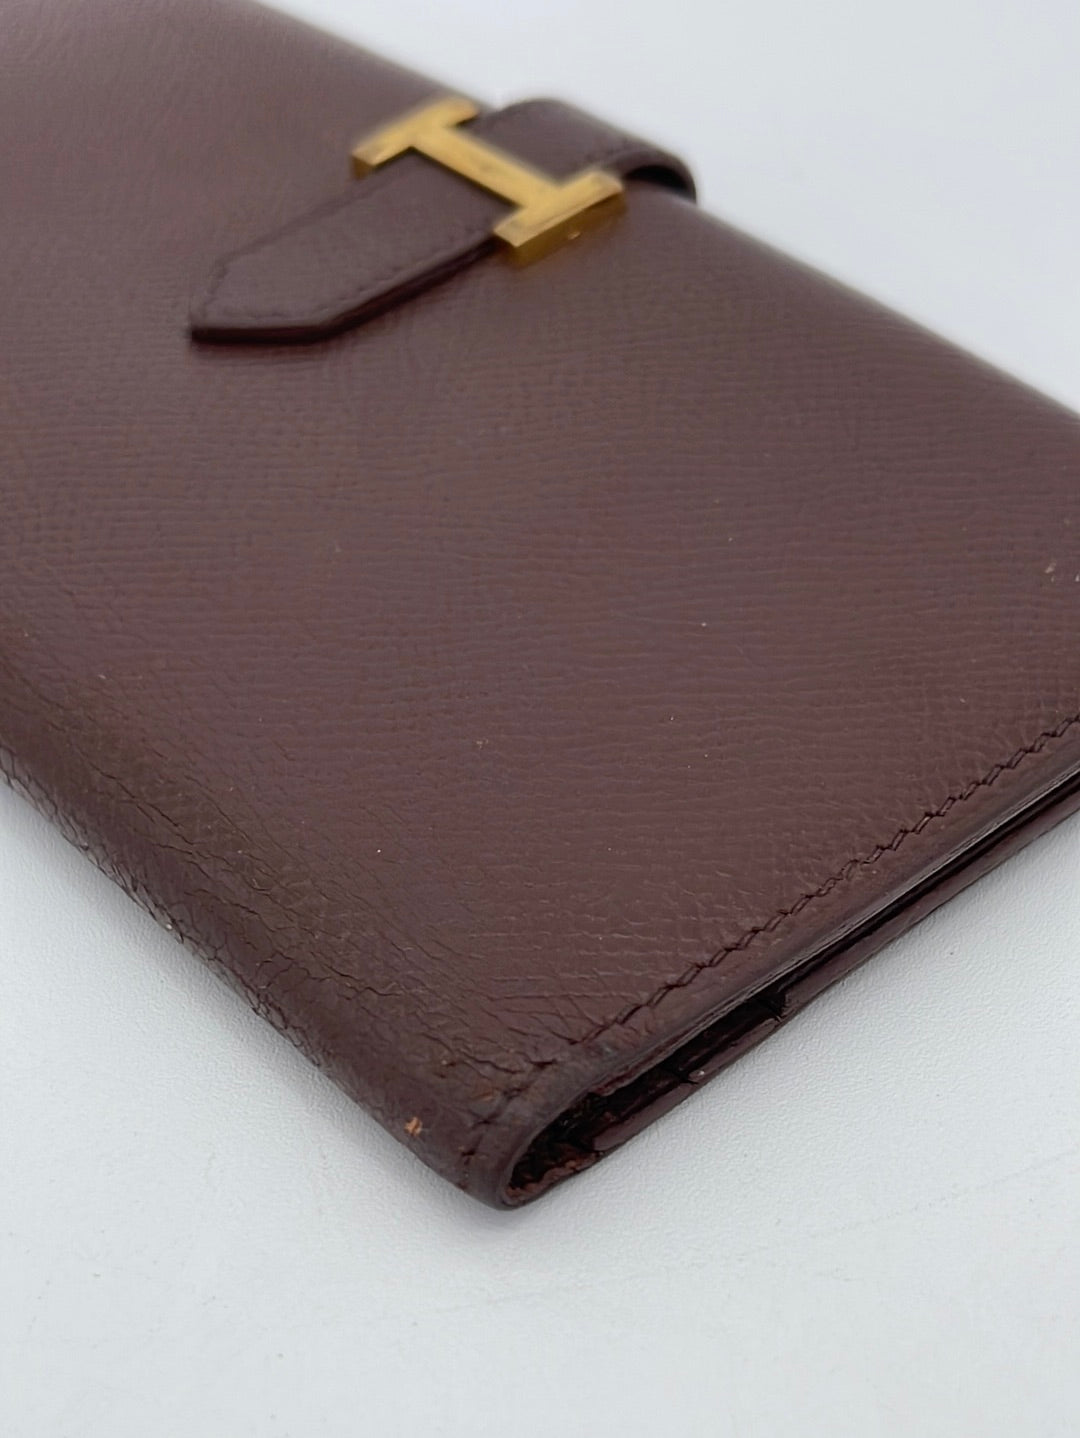 Hermes, Bags, Authentic Hermes Bearn Leather Long Bifold Wallet